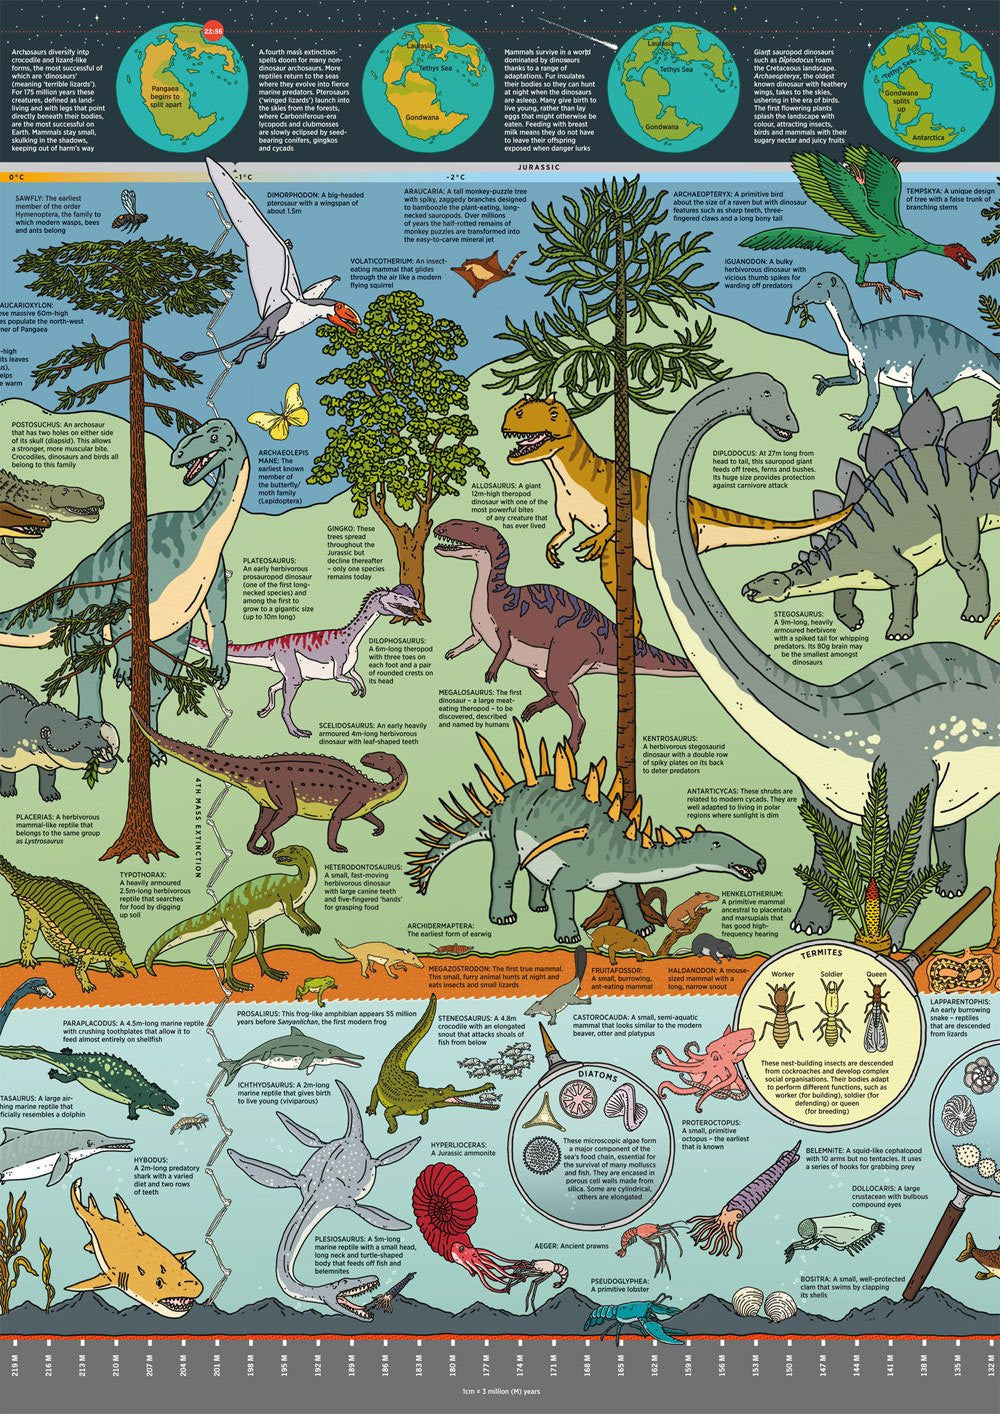 The What on Earth? Wallbook of Natural History